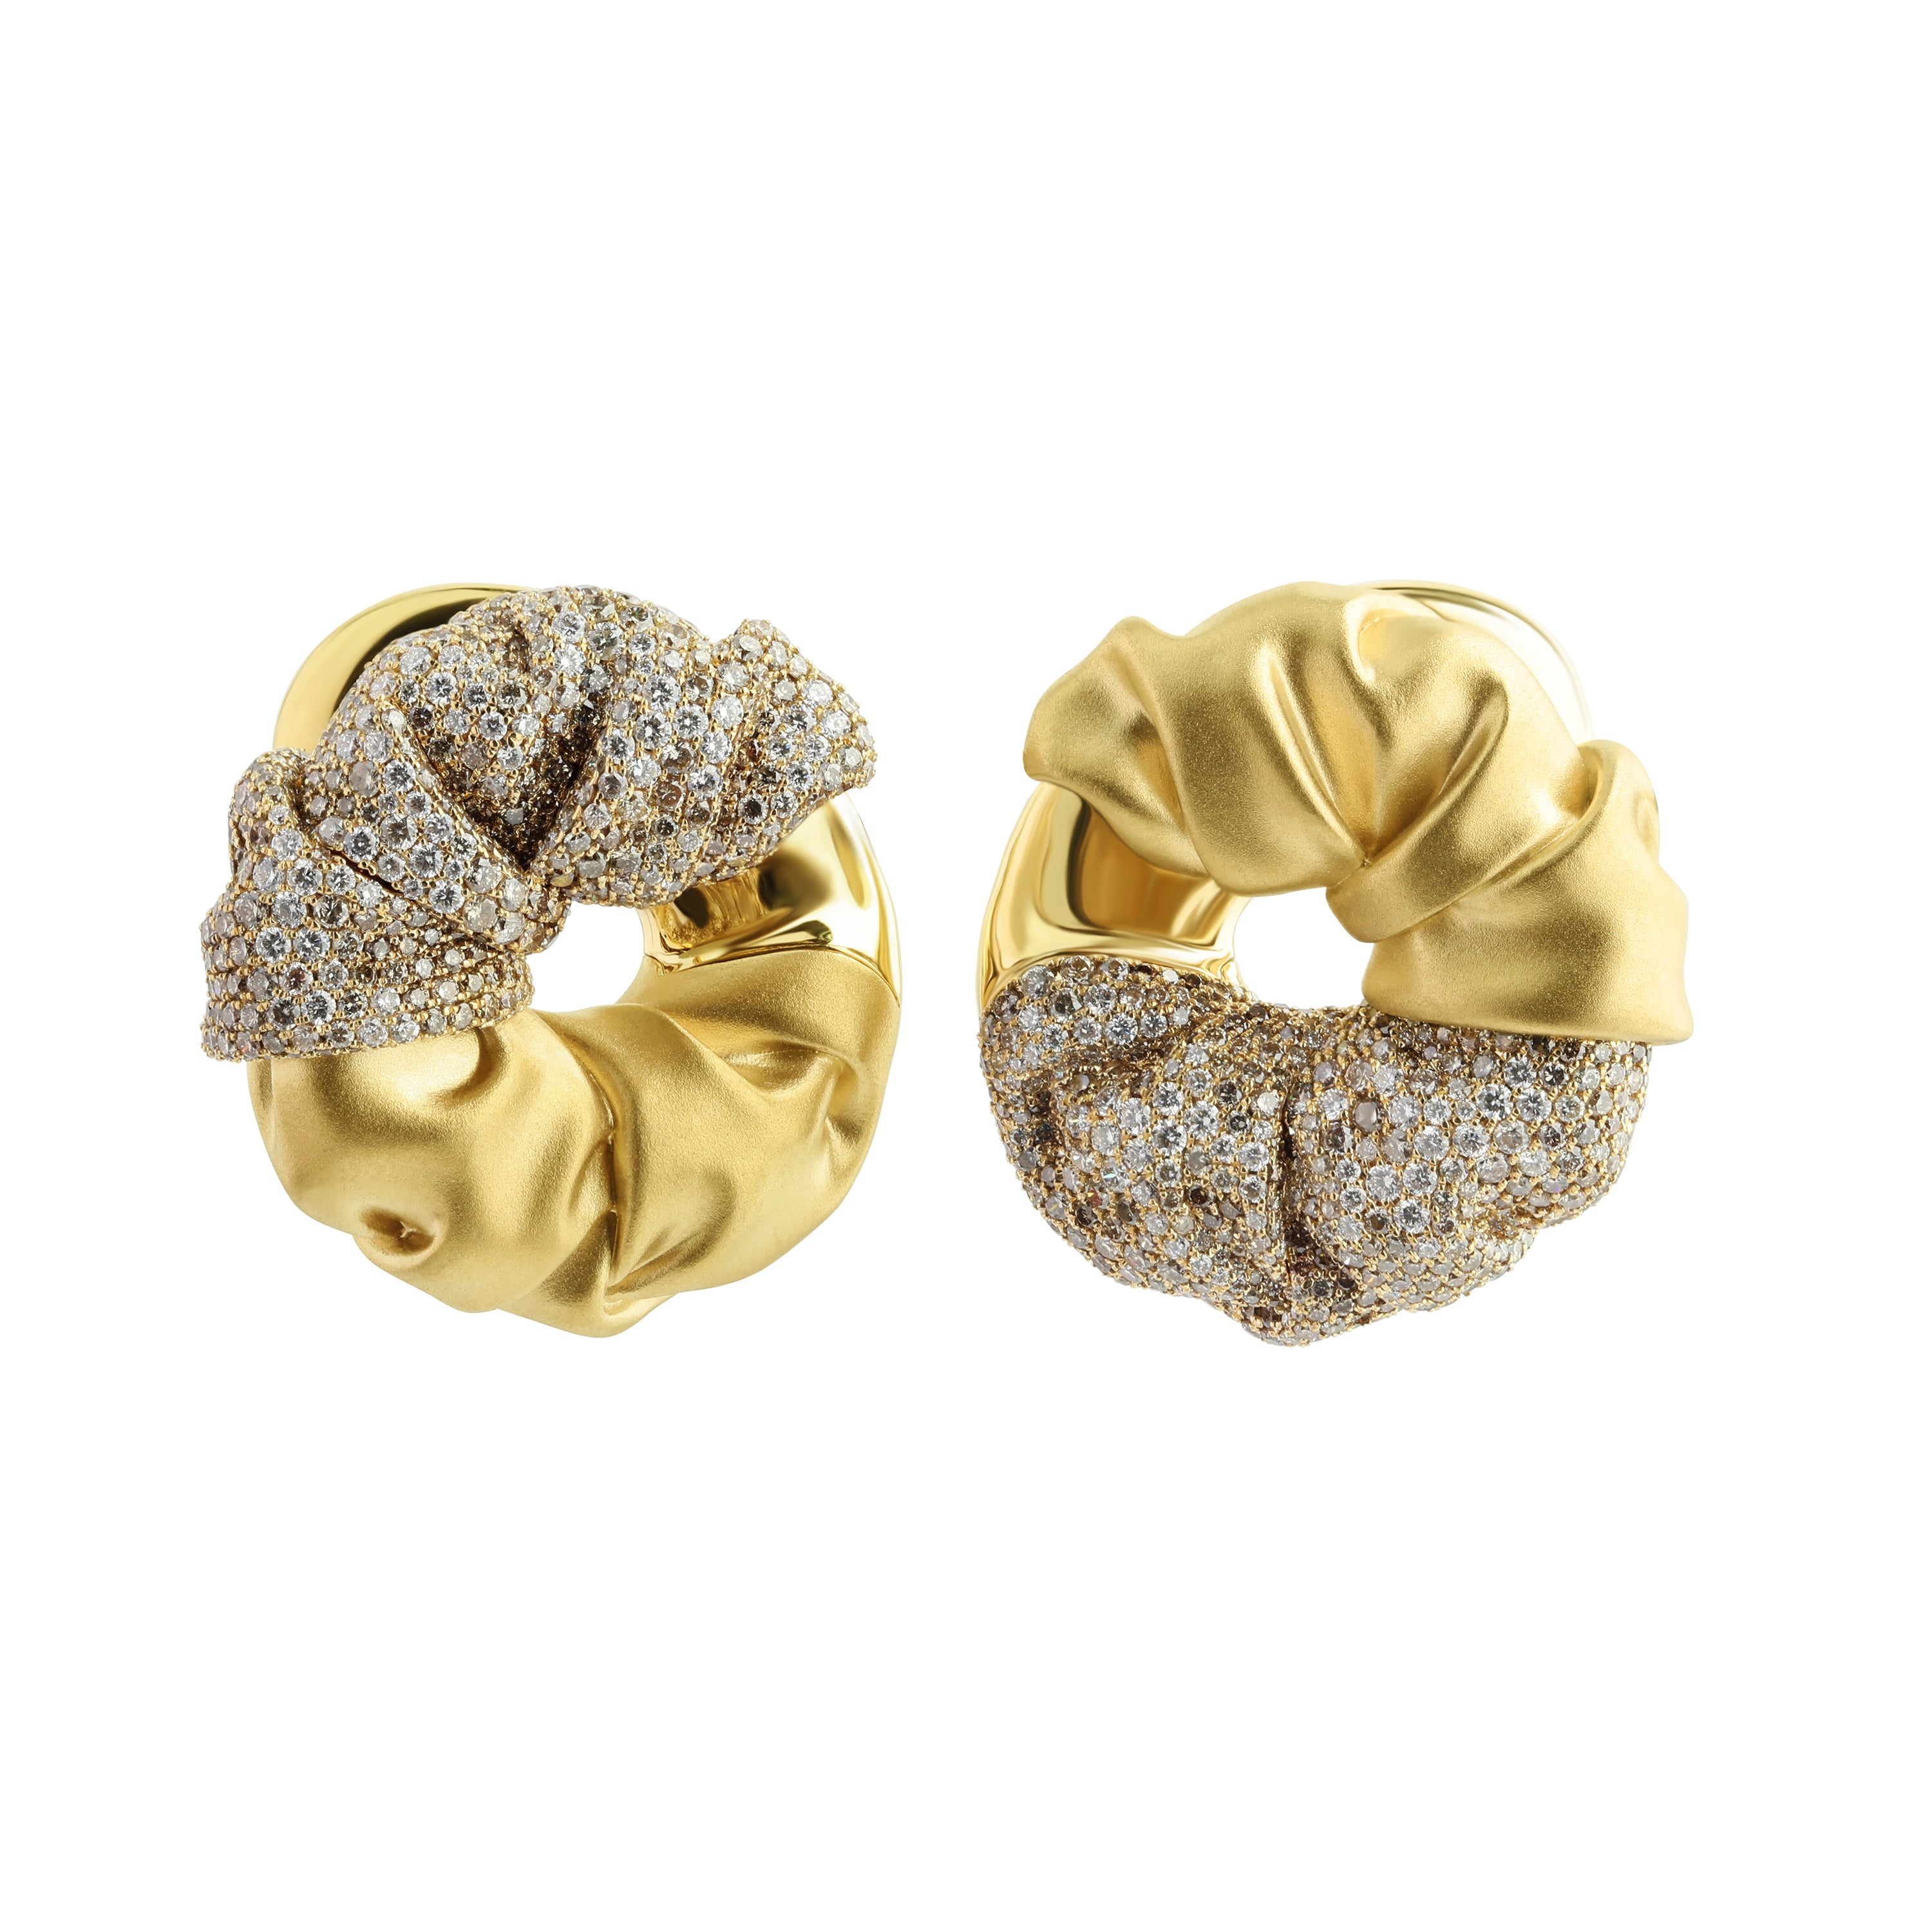 E 0132-3, 18K Yellow Gold, White and Champagne Diamonds Earrings